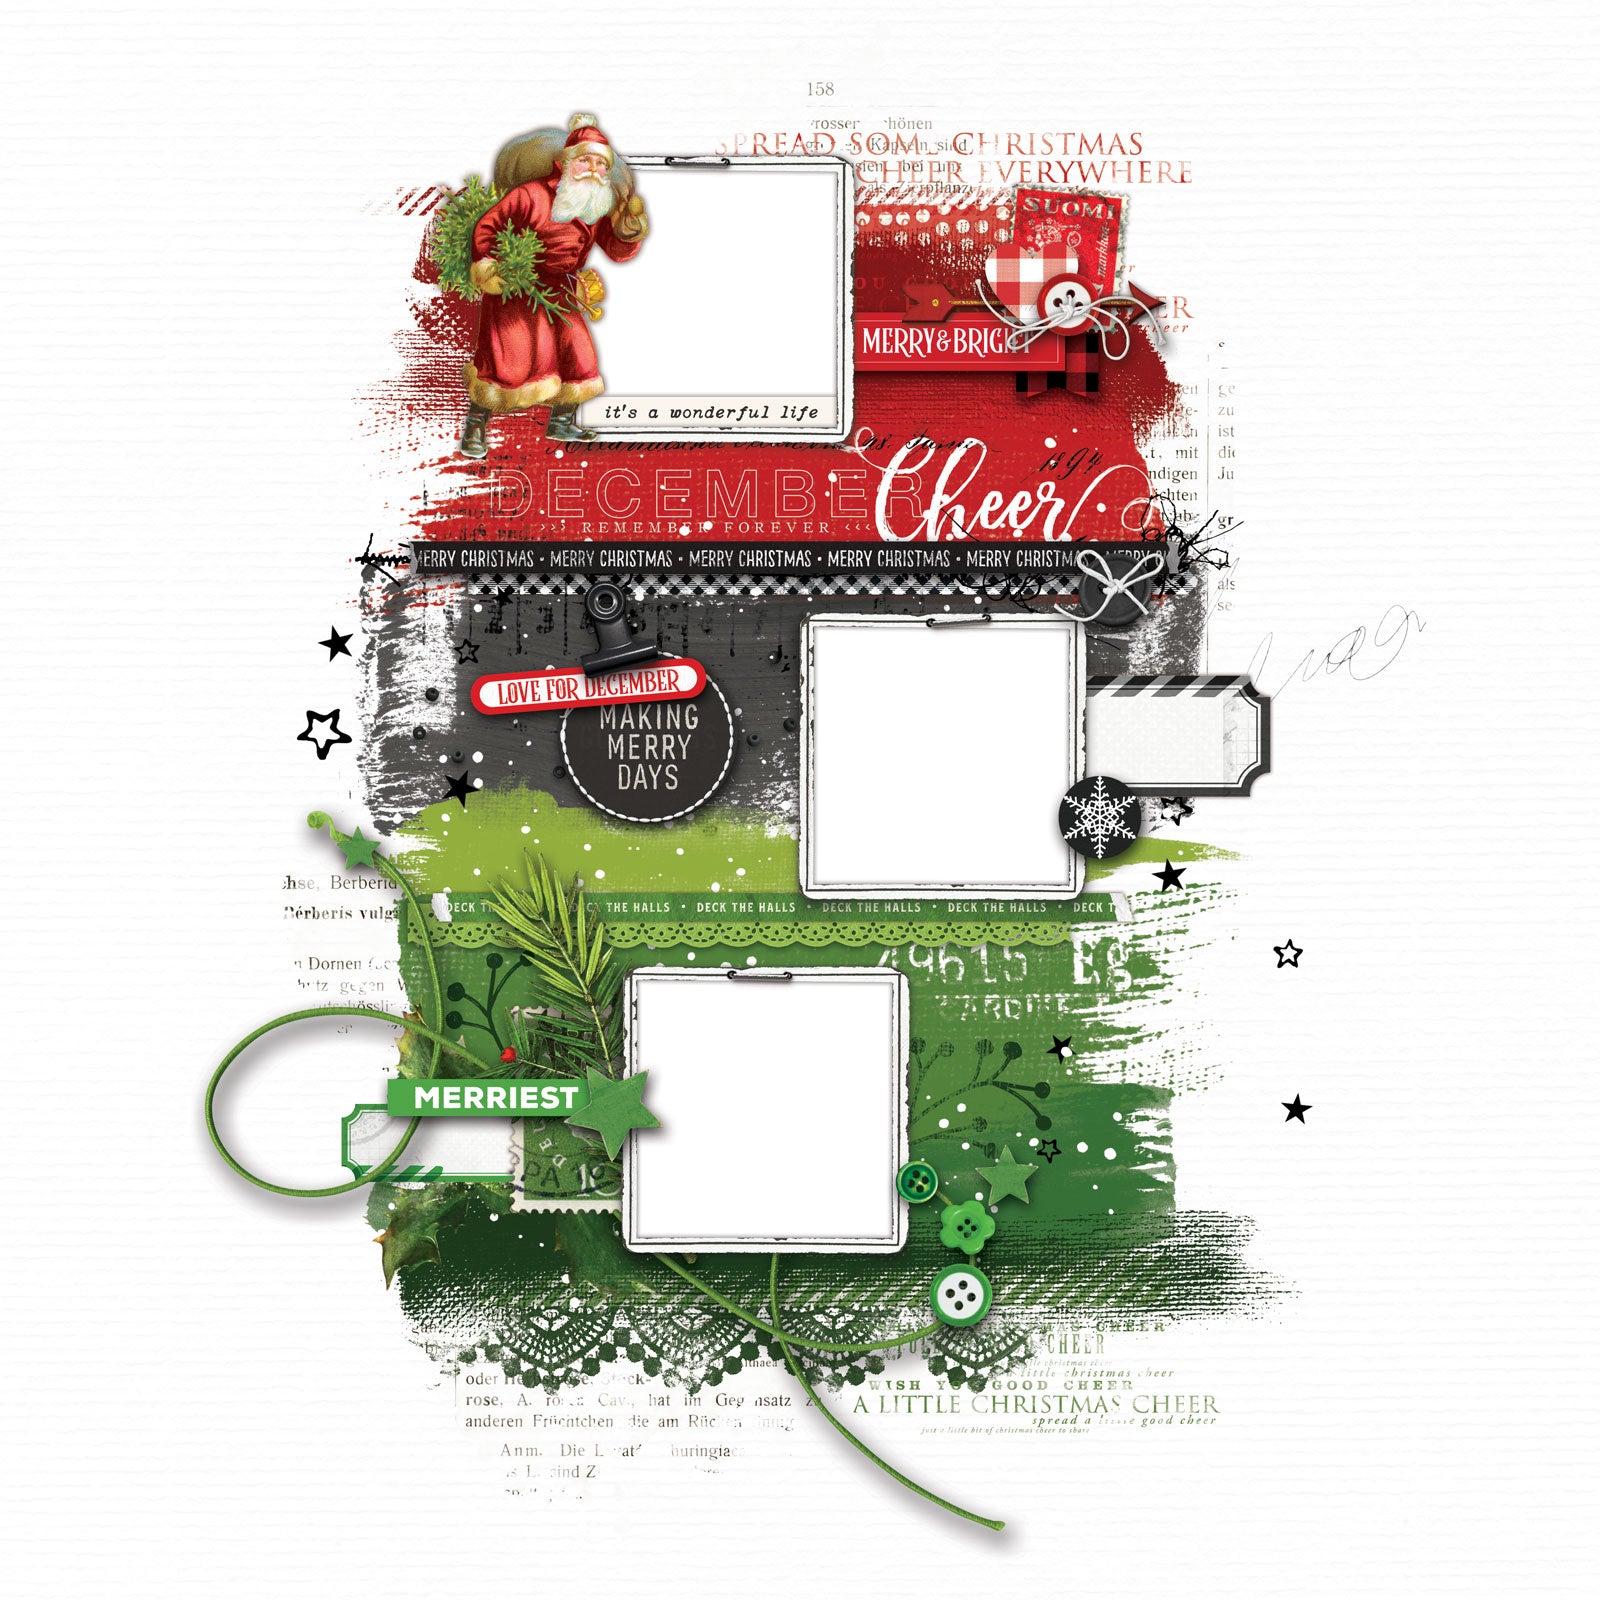 49 And Market Ultimate Page Kit-christmas Spectacular 2023 : Target